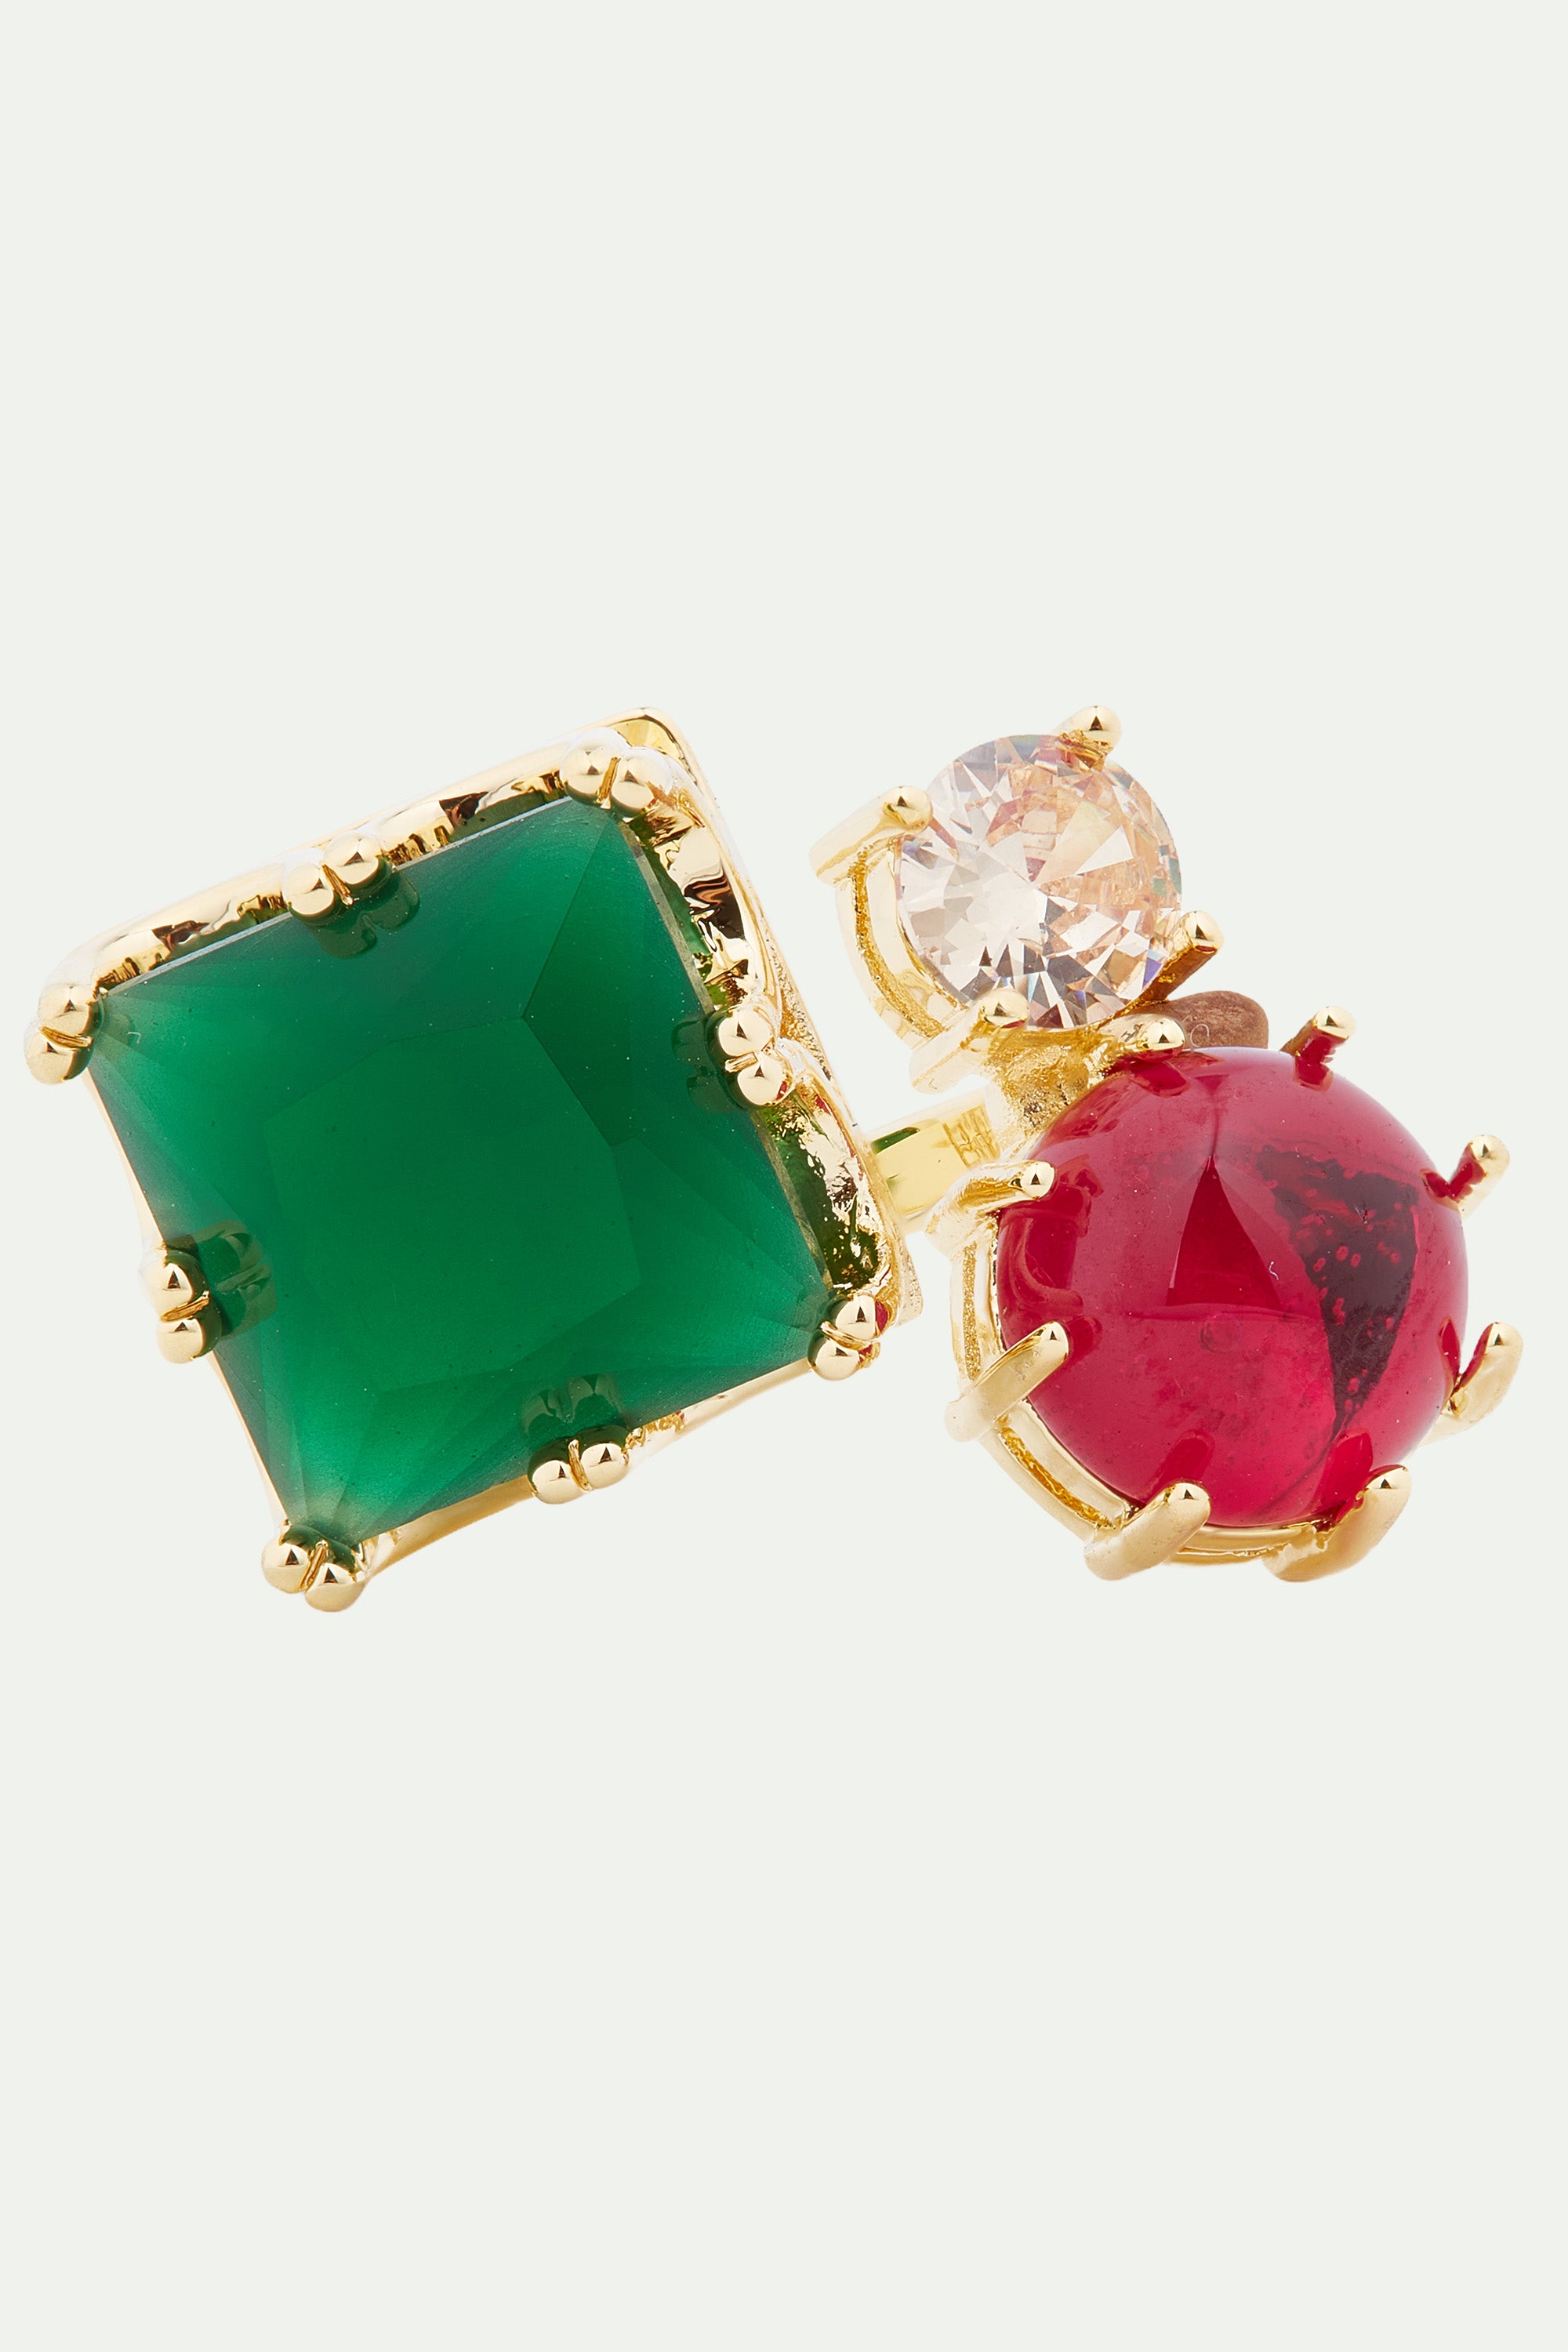 Green and red stones you and me ajustable ring